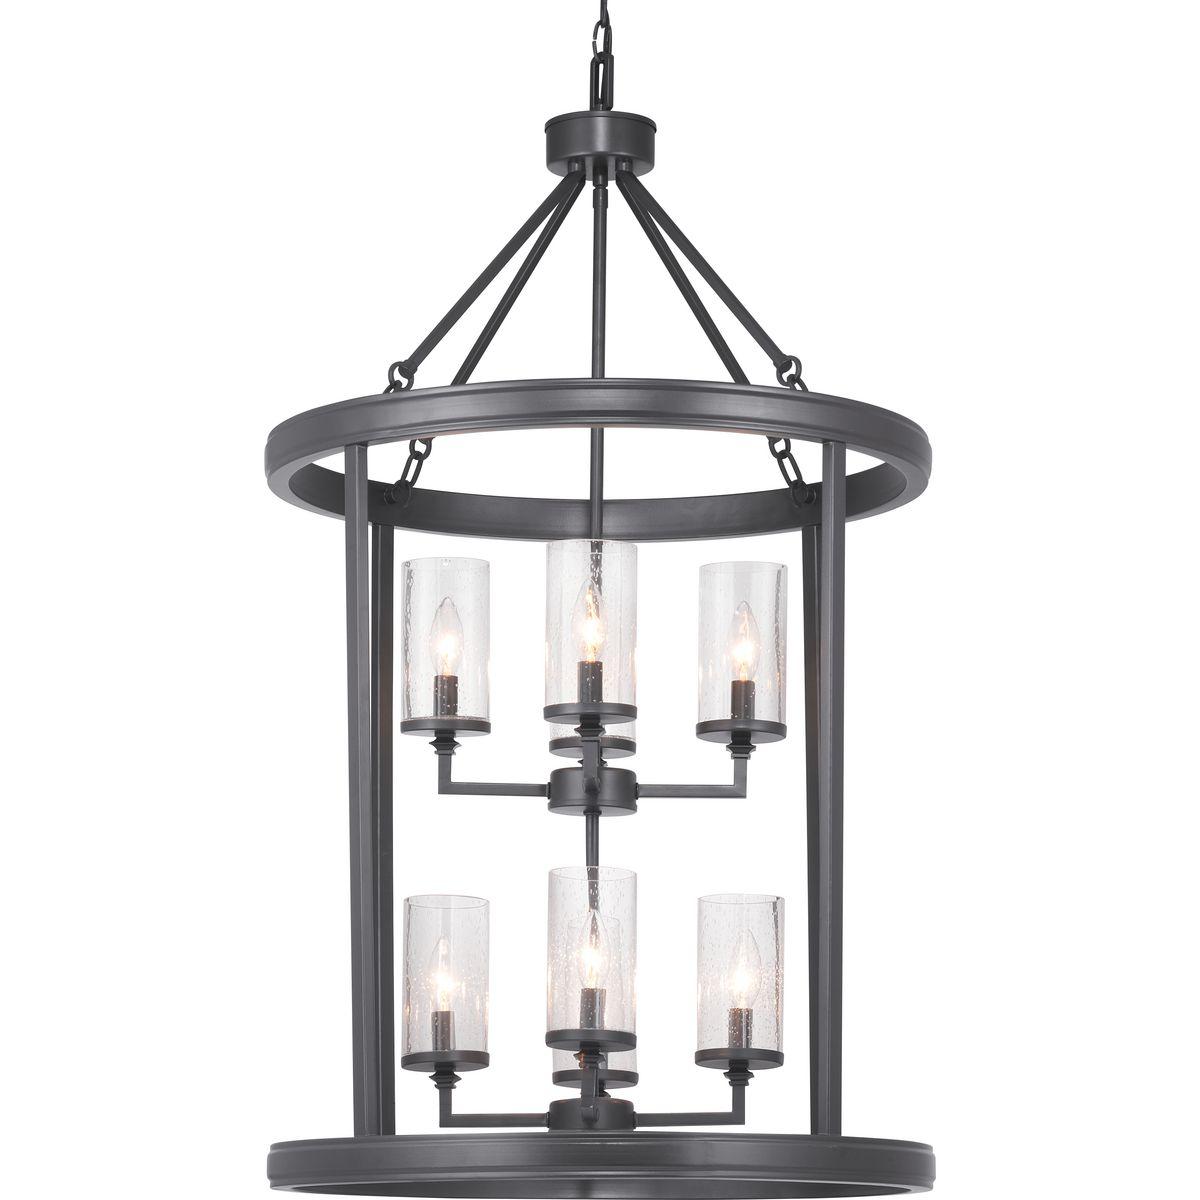 Hubbell P500165-143 A display of substantial style in an eight-light foyer, Gresham Collection’s frame was inspired by the elegance of traditional iron structures. Specific attention to forging details creates a distinctive collection for Transitional and Farmhouse interior 